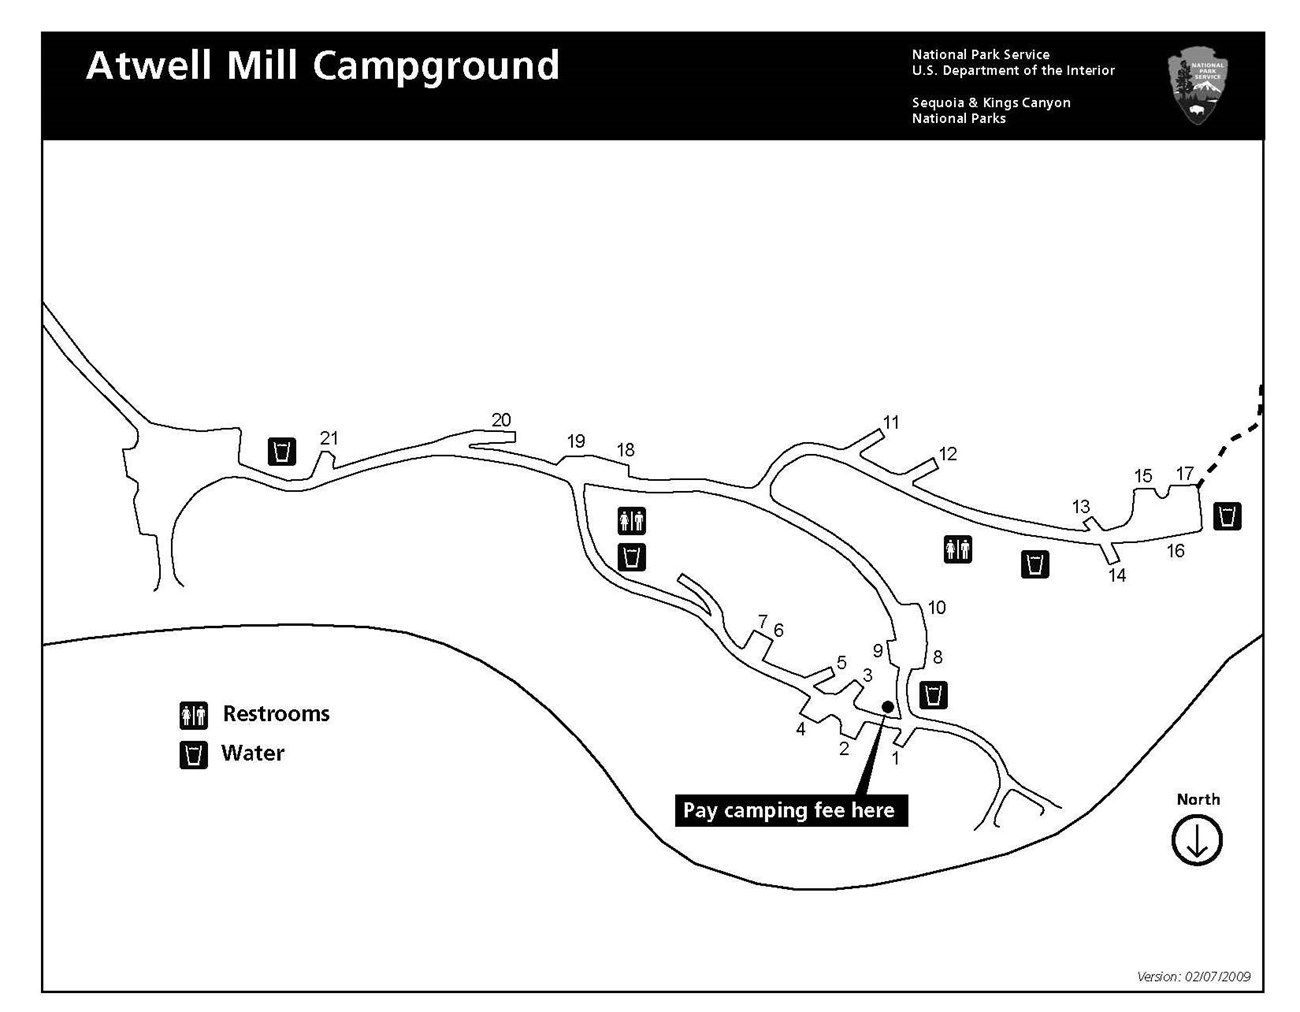 Atwell Mill Campground map